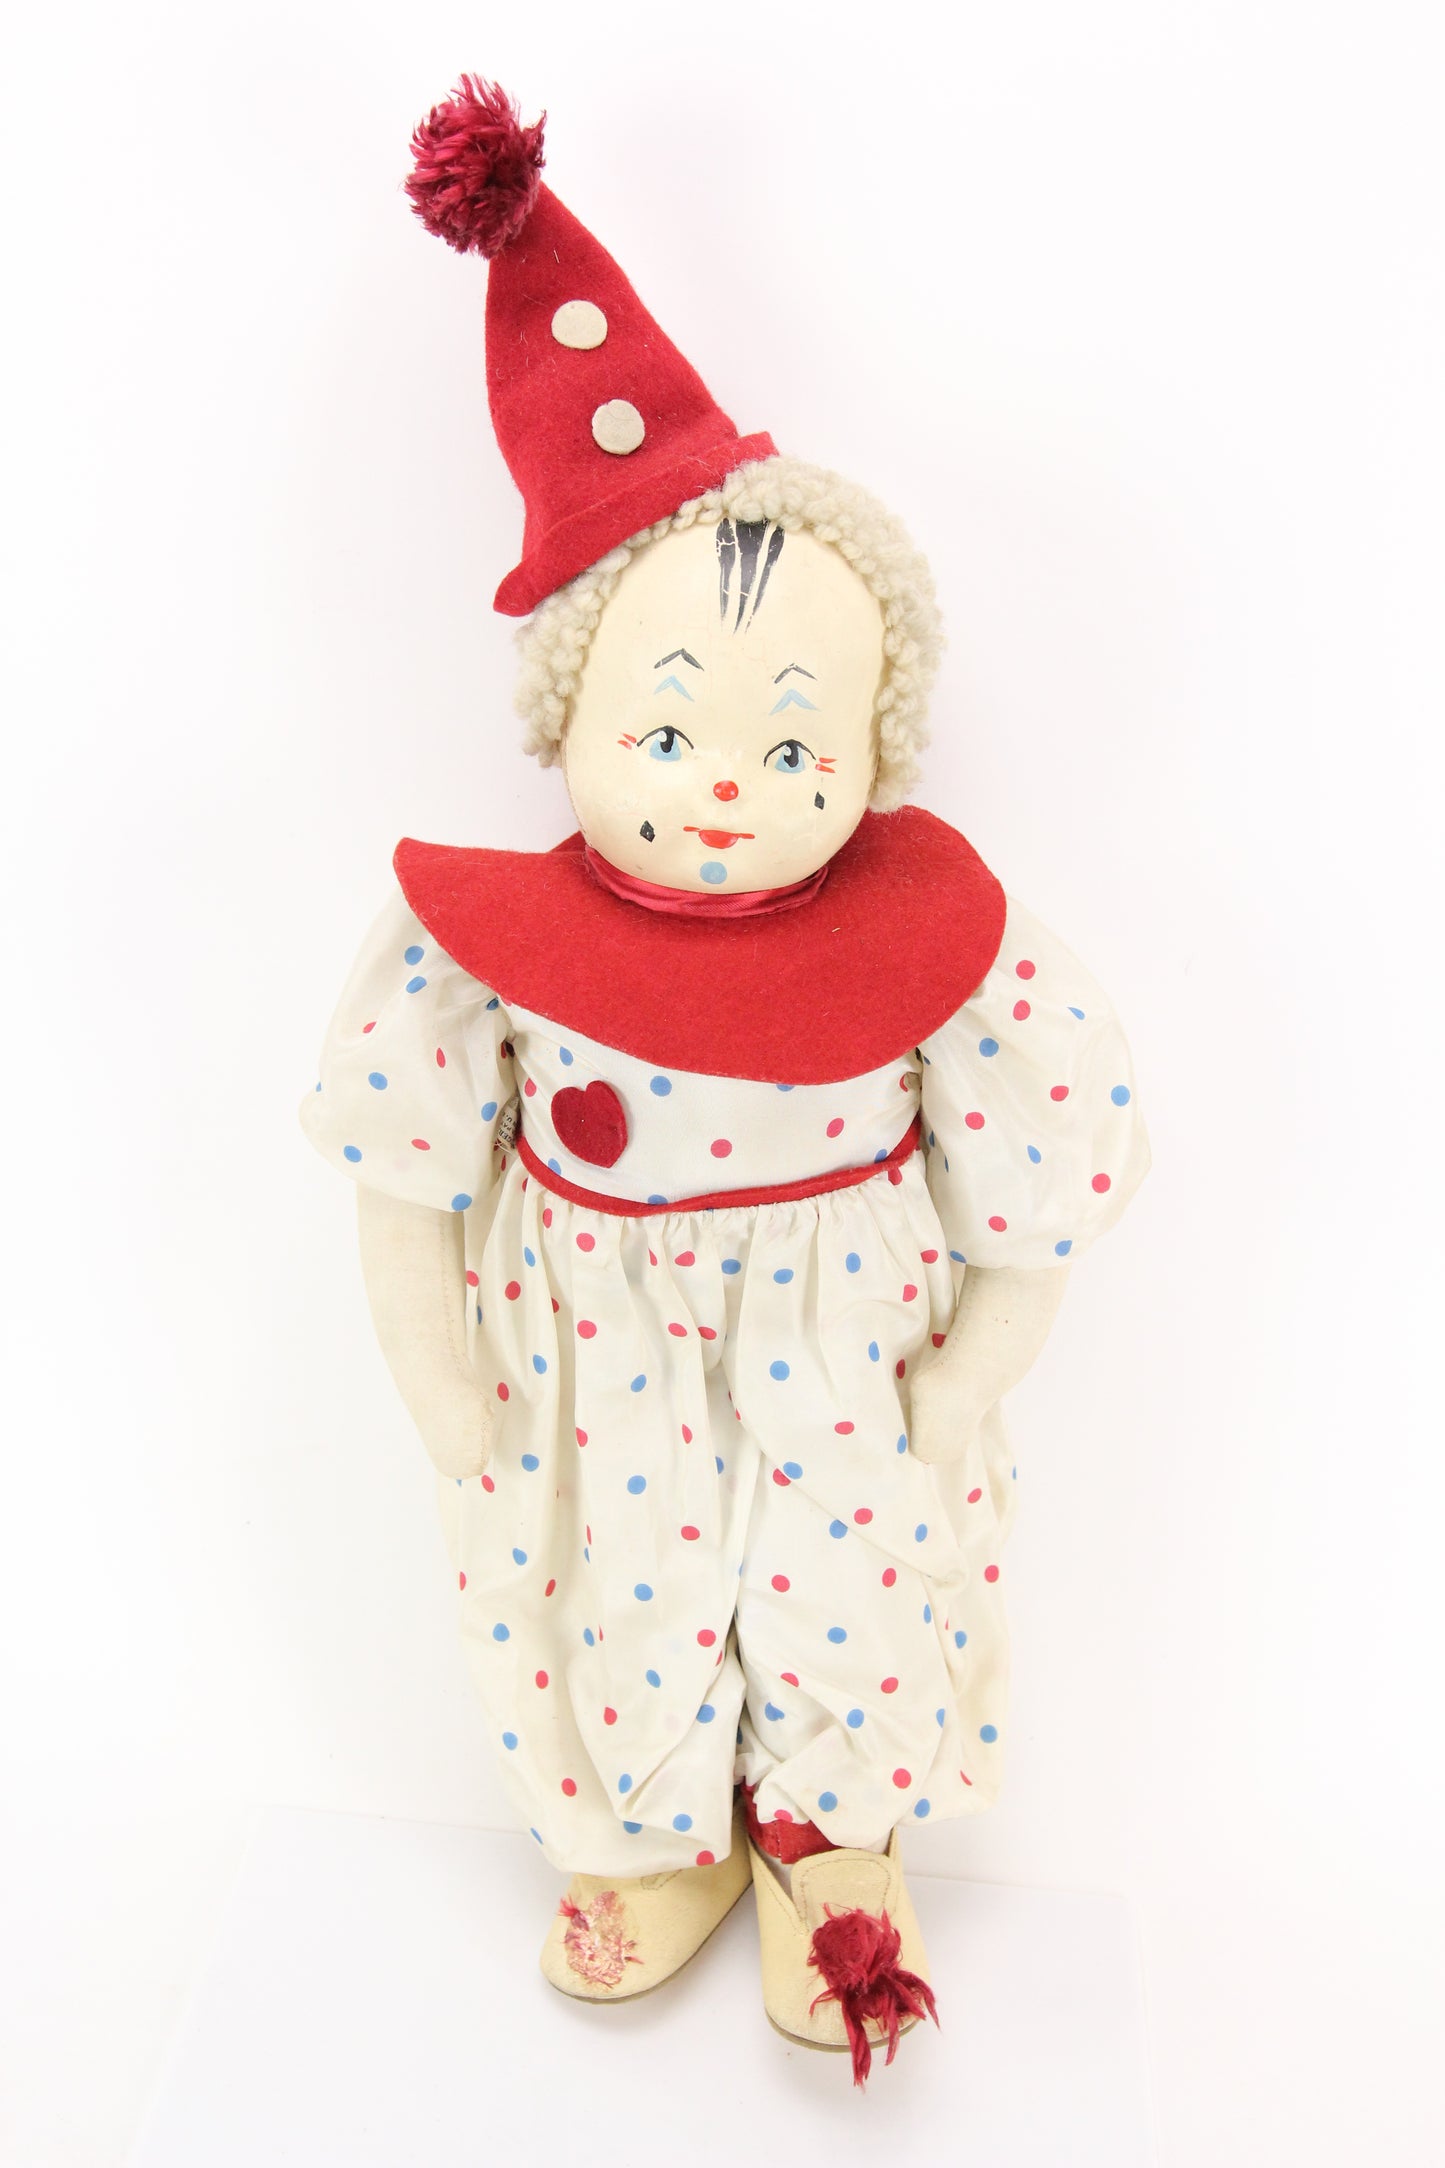 Vintage Cloth and Leather Clown Doll by Krueger, NY, Made in the USA, 19"